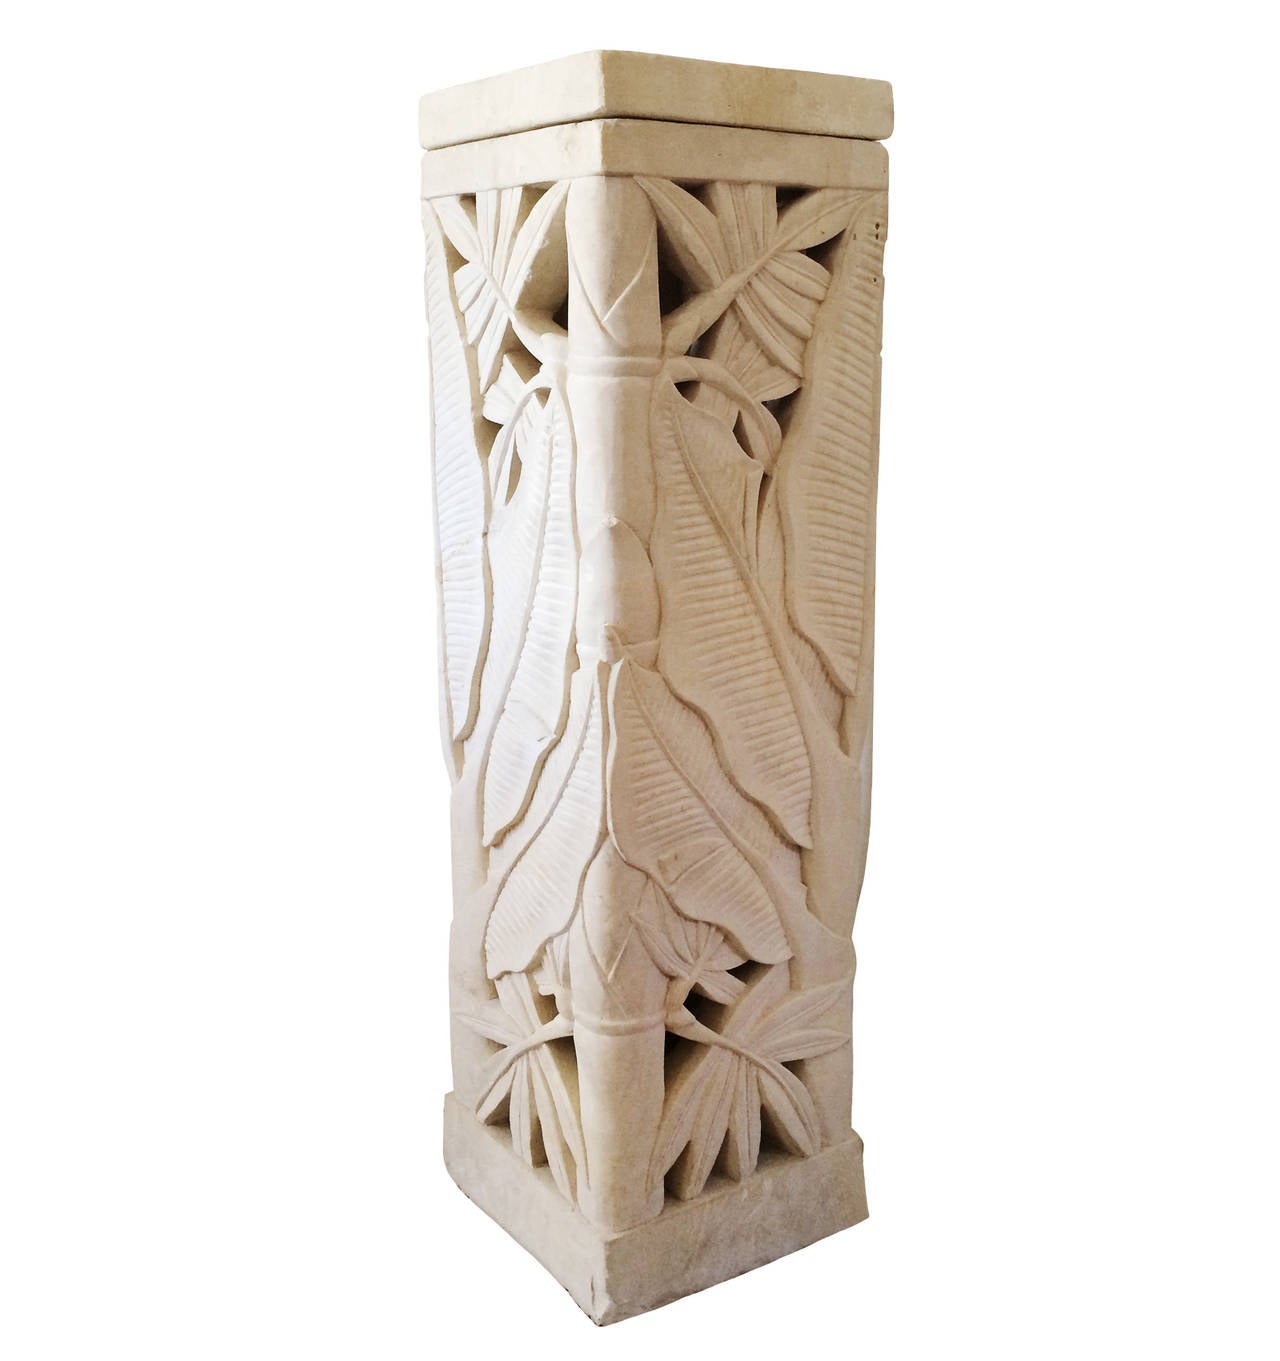 A pair of French Deco Pierre de Beaulieu stone pedestals from the French Riviera; circa 1925. A series of intricately carved leaves; pierced stone work; leading up to a stone cap. An up-light could be placed within for added drama.